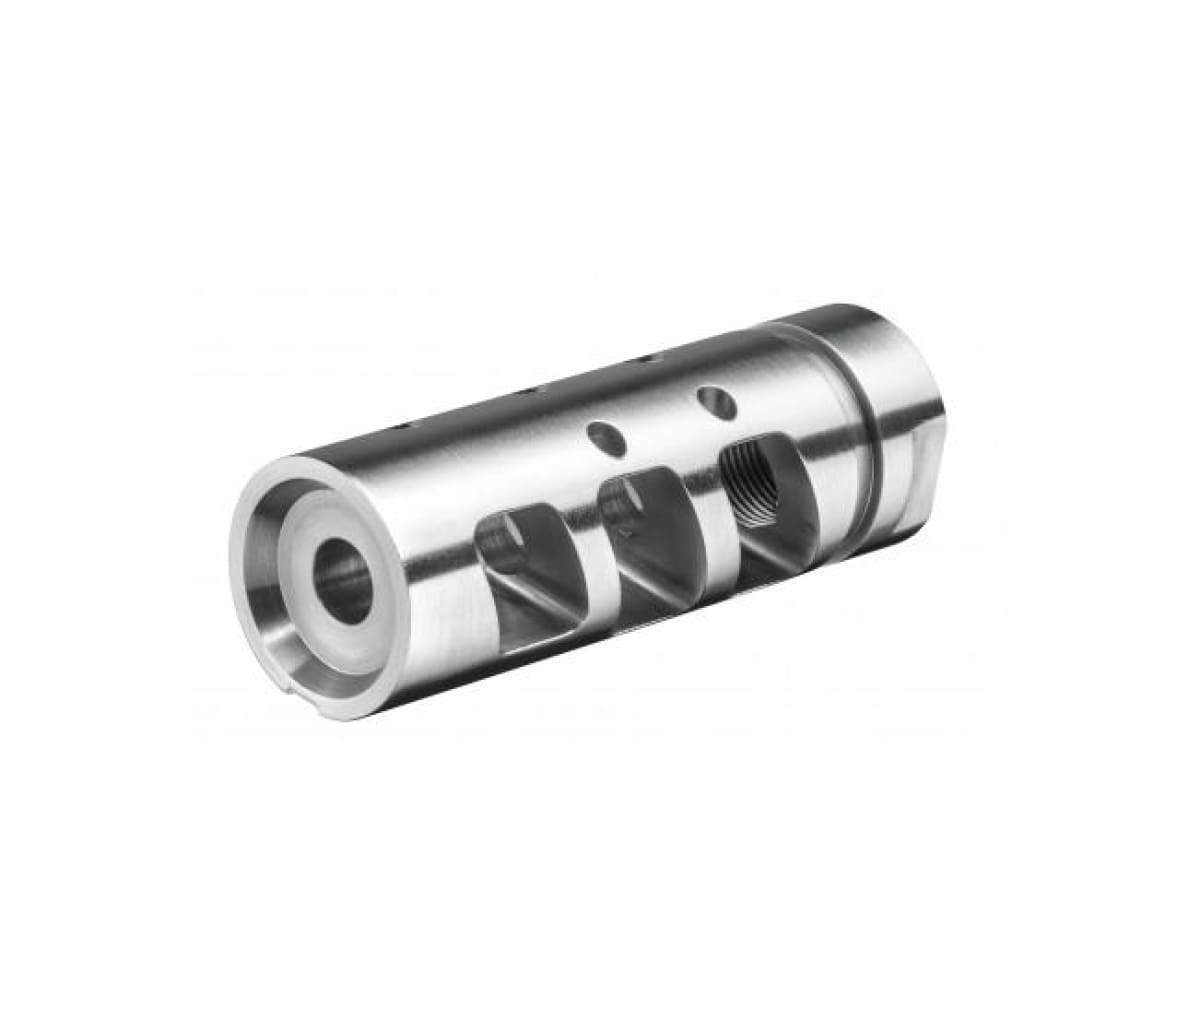 Rise Armament RA-701 Compensator - .308 - Stainless Steel - AR15Discounts